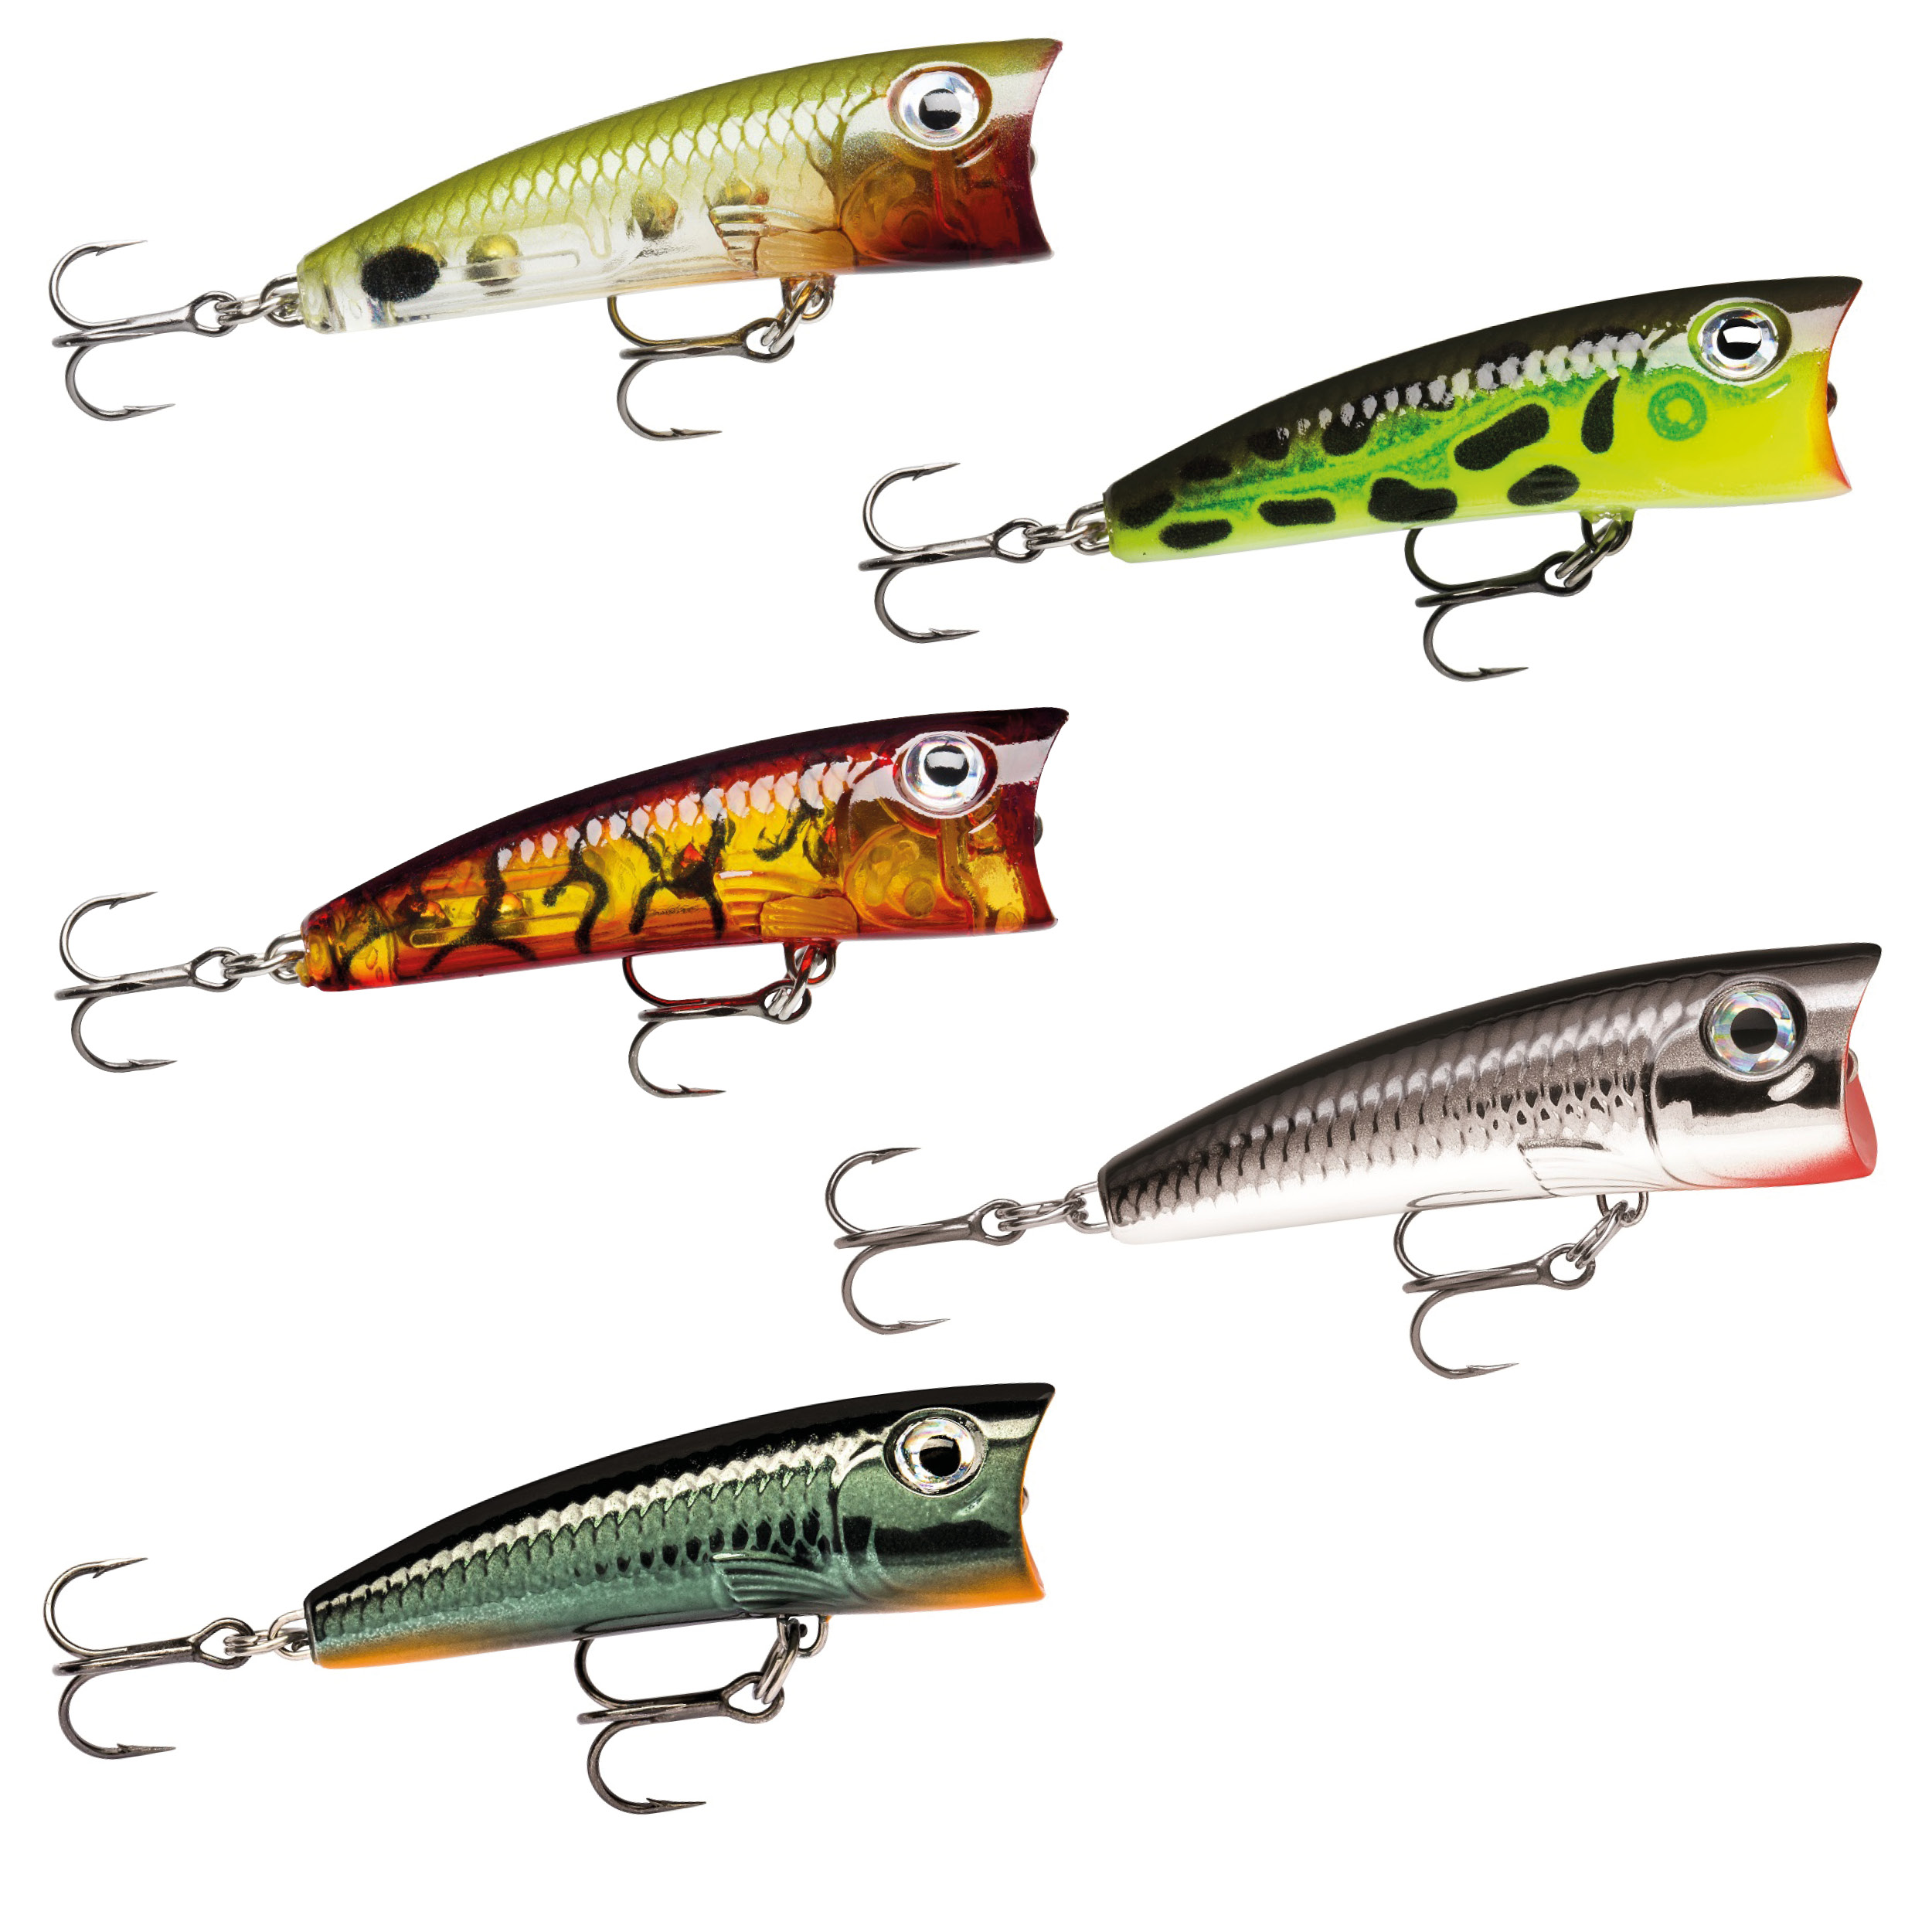 Rapala Ultra Light Pop 4 cm, Surfacebaits, Lures and Baits, Spin Fishing